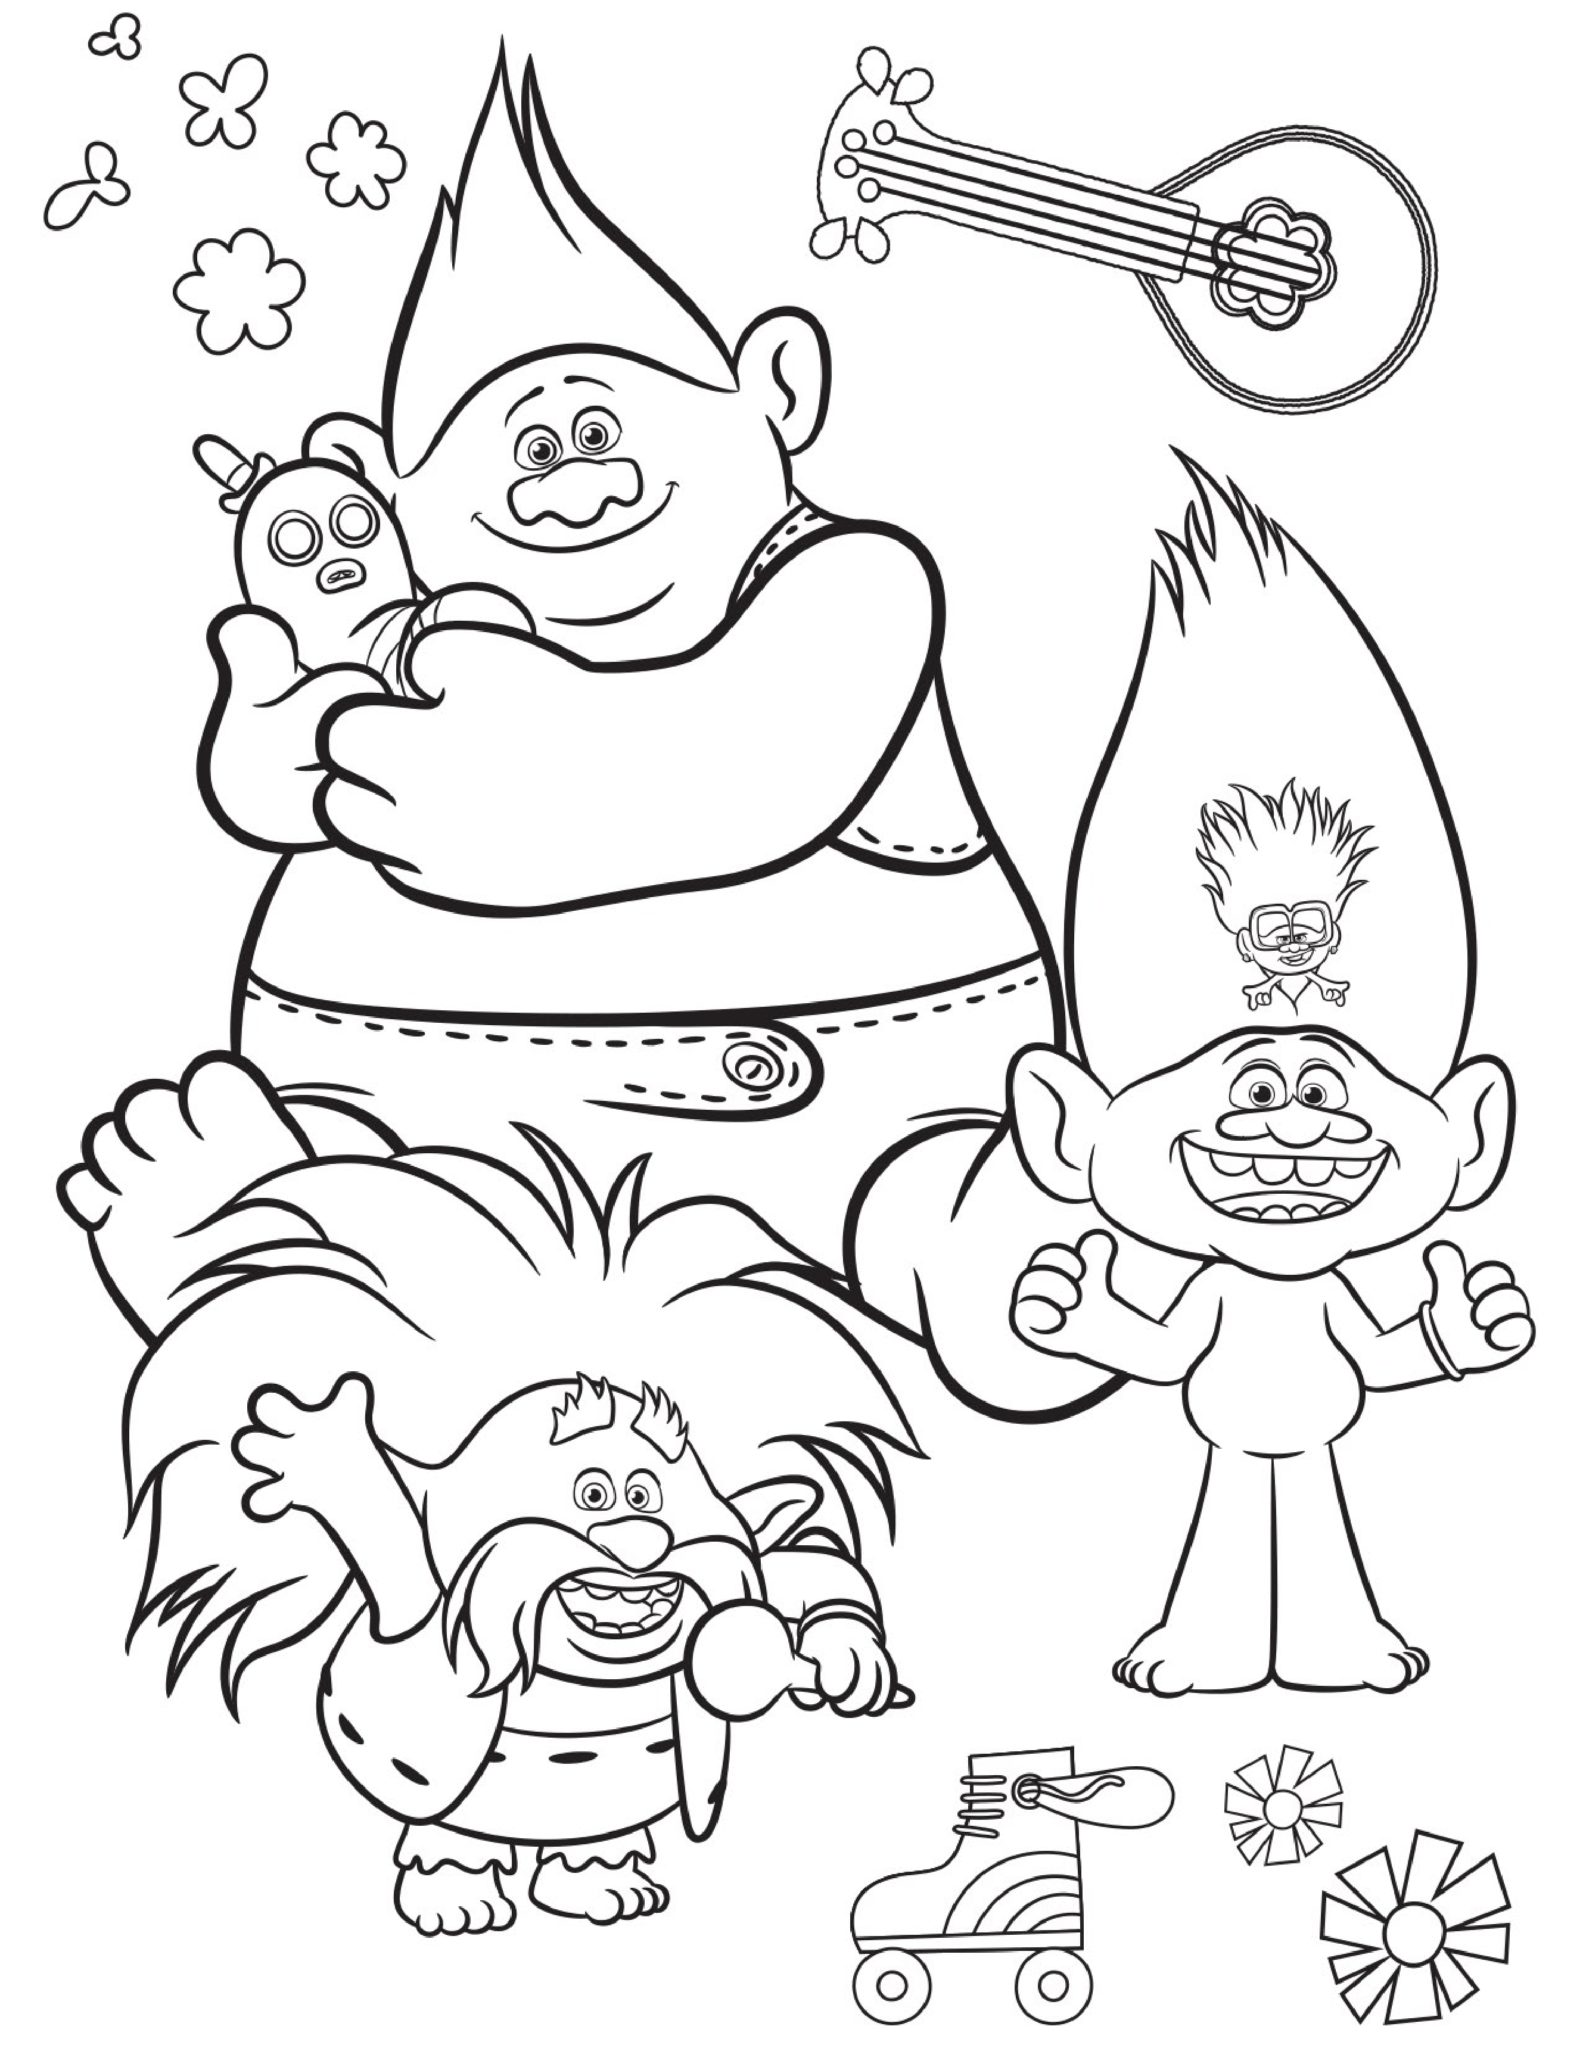 Free Printable TROLLS Coloring Pages, Activity Sheets, Zoom Backgrounds &  More! | Crazy Adventures in Parenting